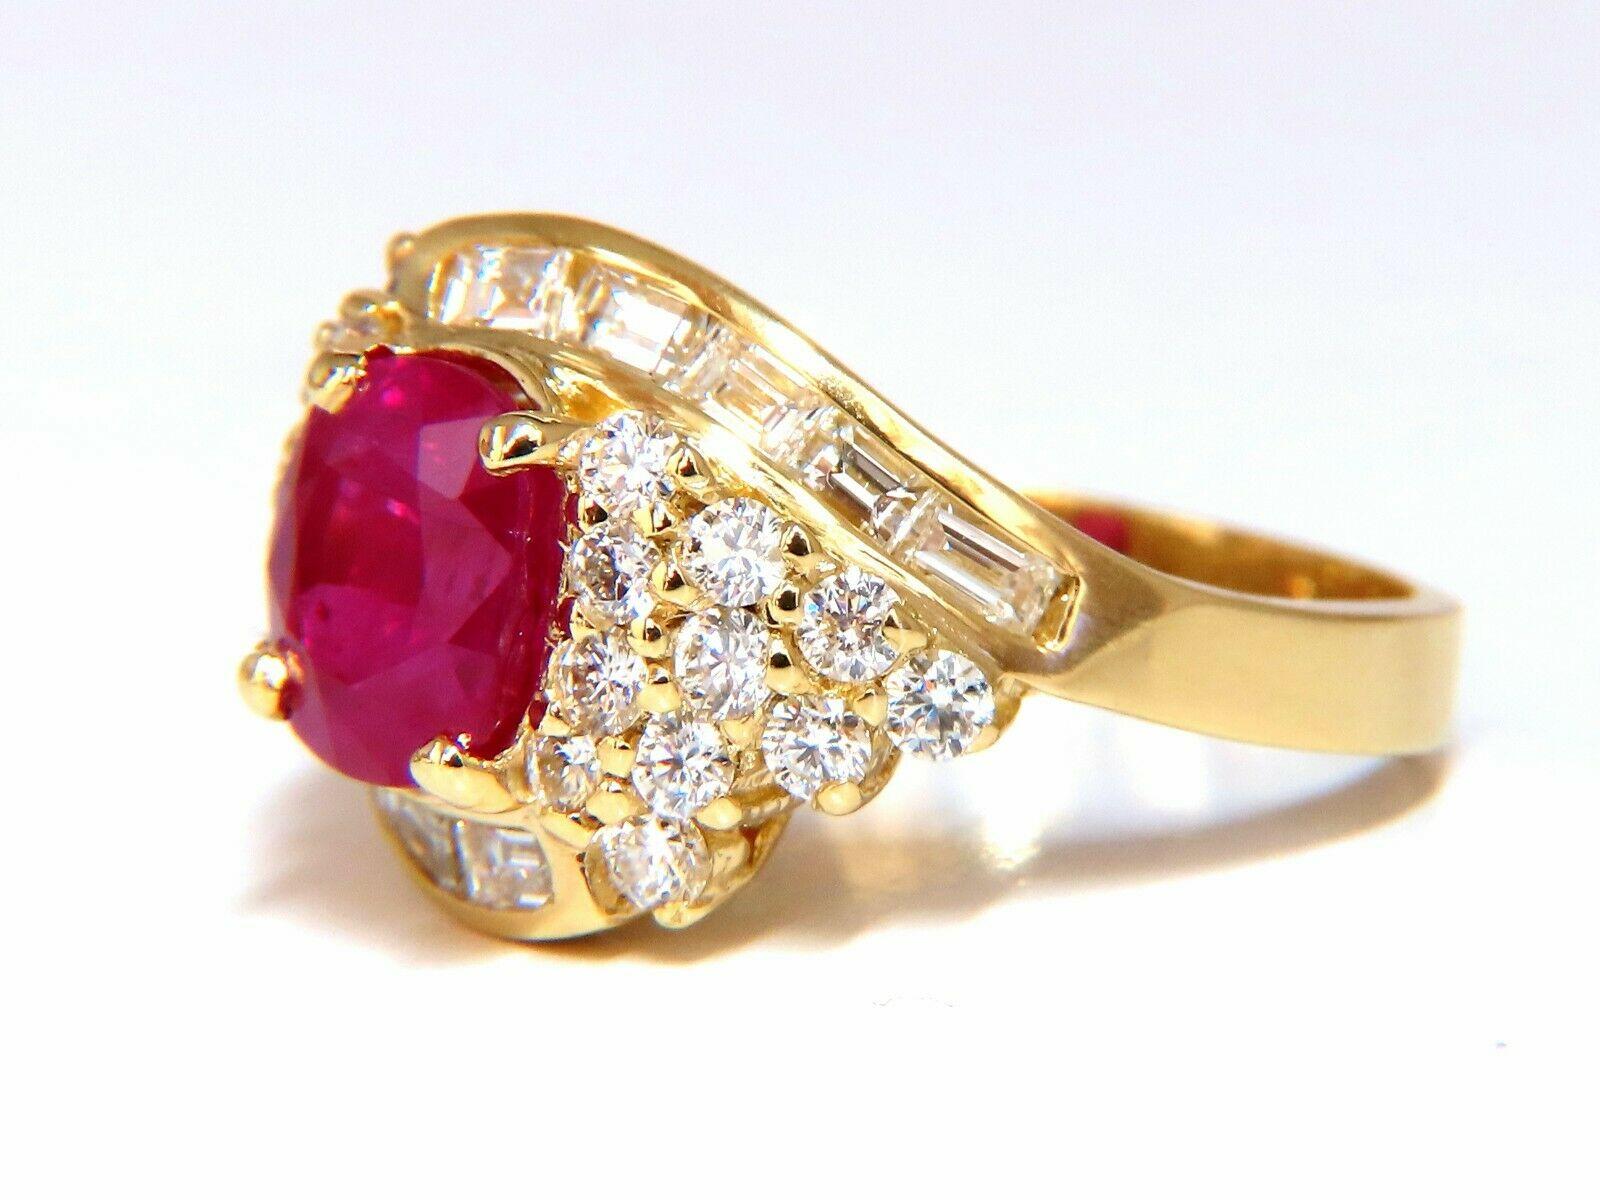 GIA Certified 4.08 Carat Burma Red Ruby Diamonds Ring 18 Karat In New Condition For Sale In New York, NY